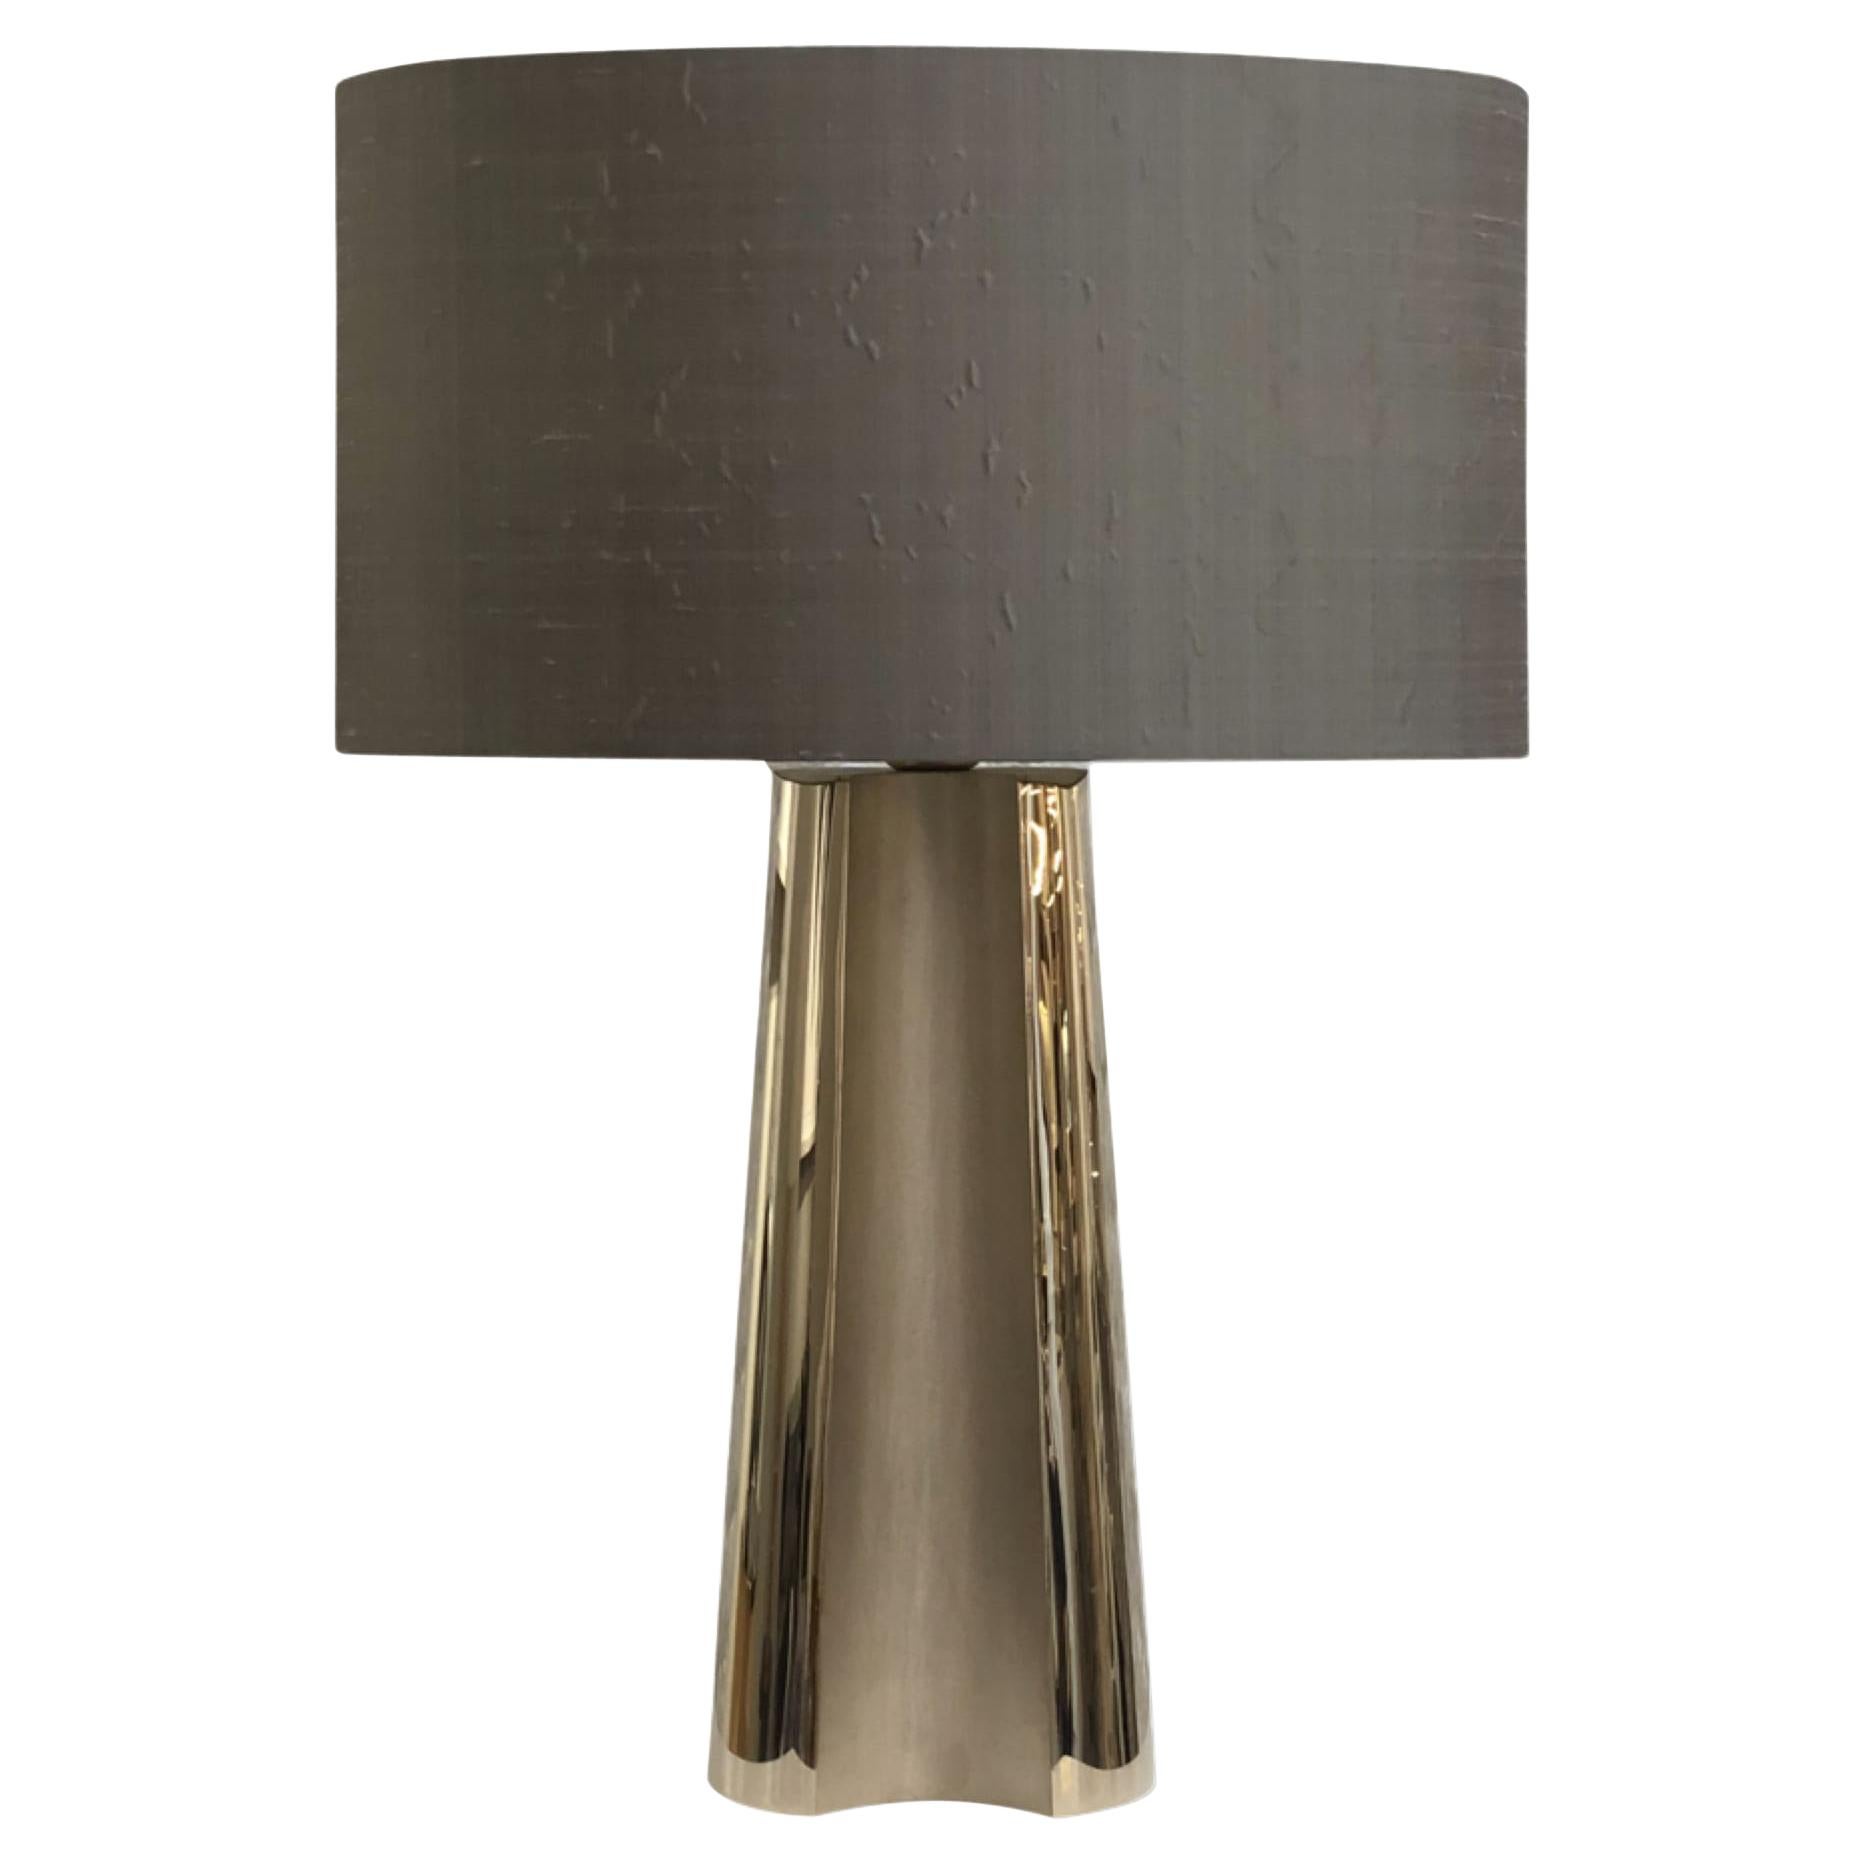 Garrido Concave Table Lamp in 24 Karat Champagne Gold Finish For Sale